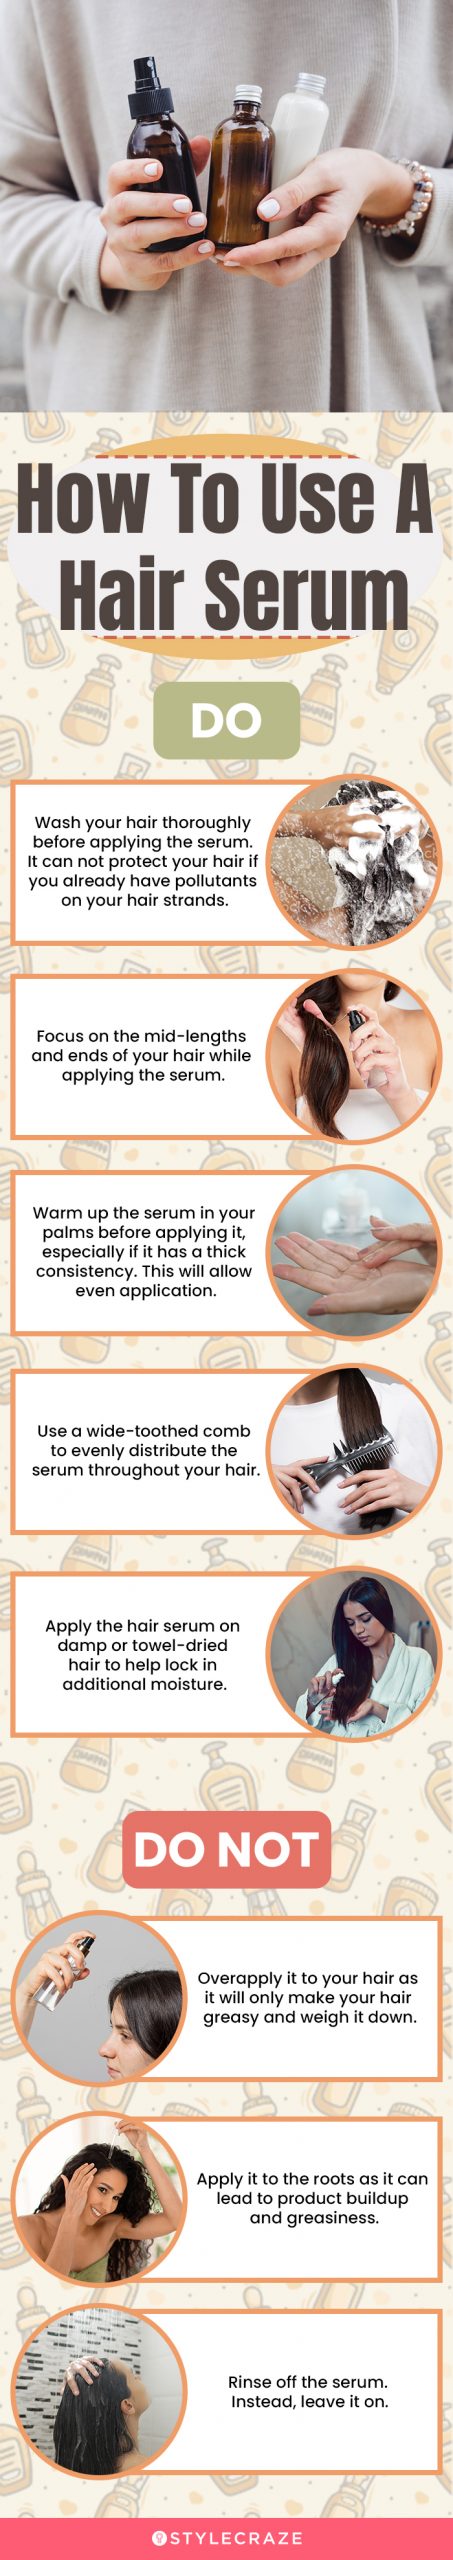 How To Use A Hair Serum (infographic)